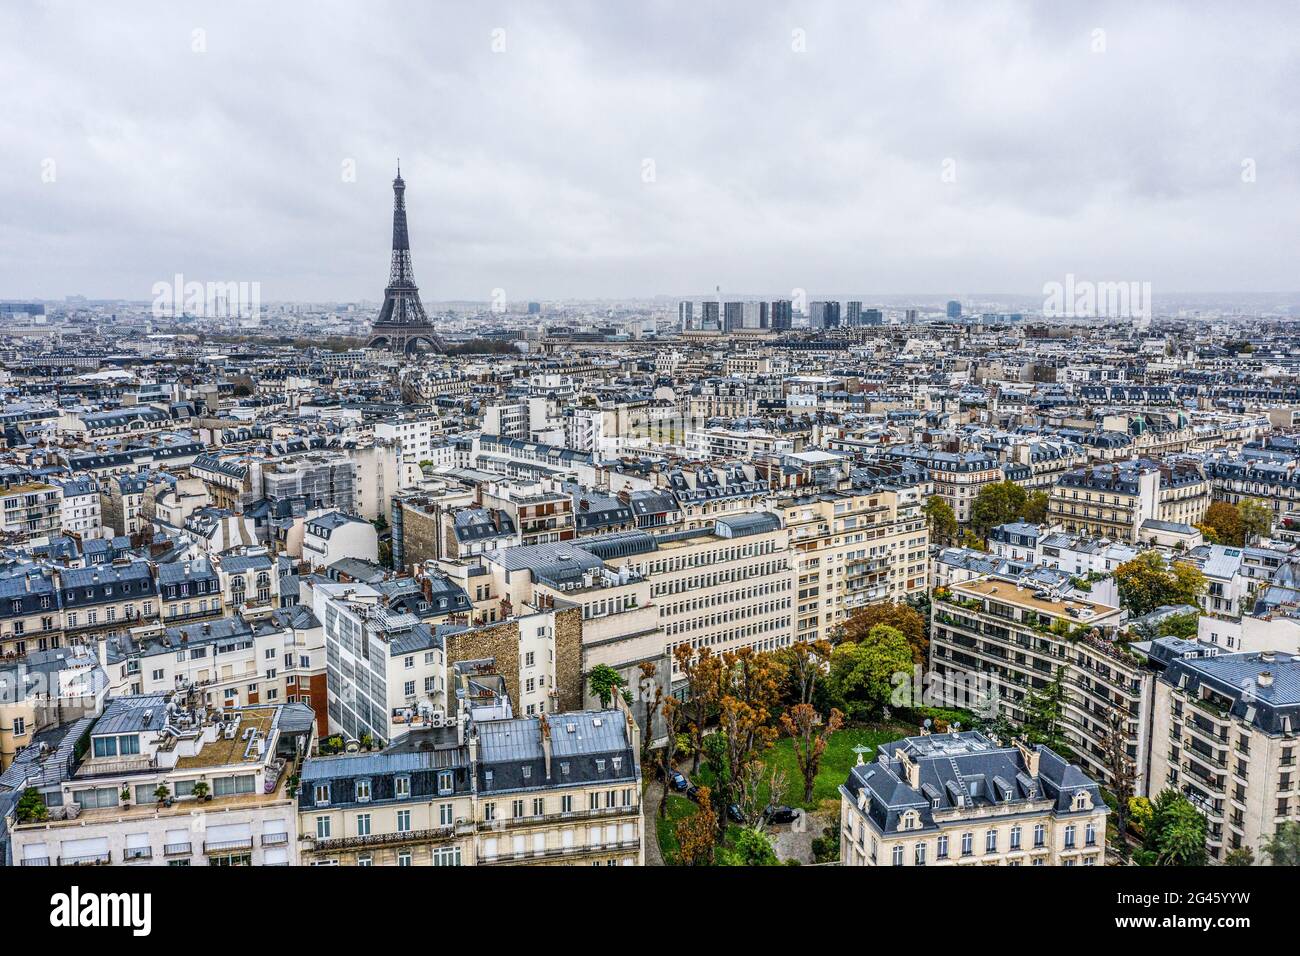 View on Eiffel tower over the roofs of Paris on a grey cloudy day Stock Photo